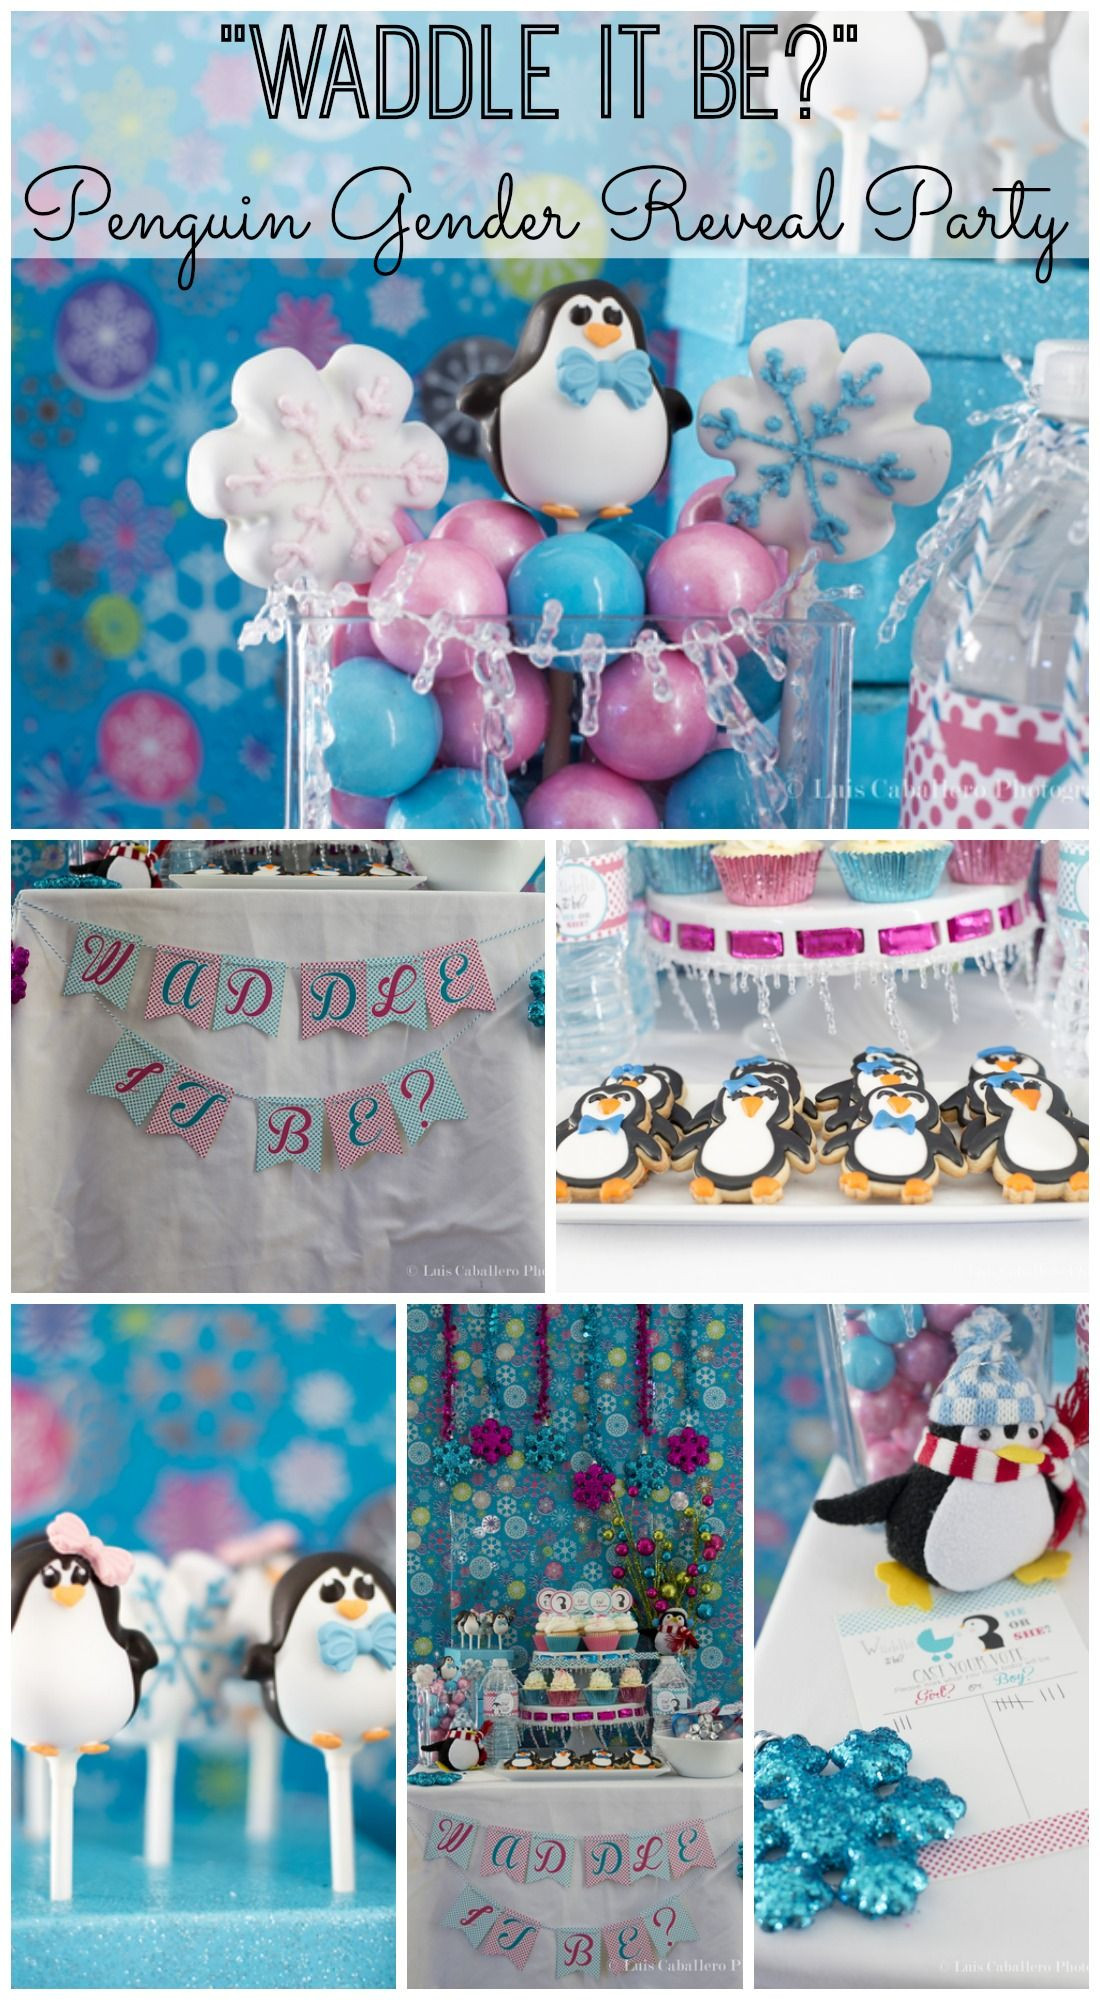 Winter Gender Reveal Party Ideas
 "Waddle it Be " gender reveal baby shower great idea for